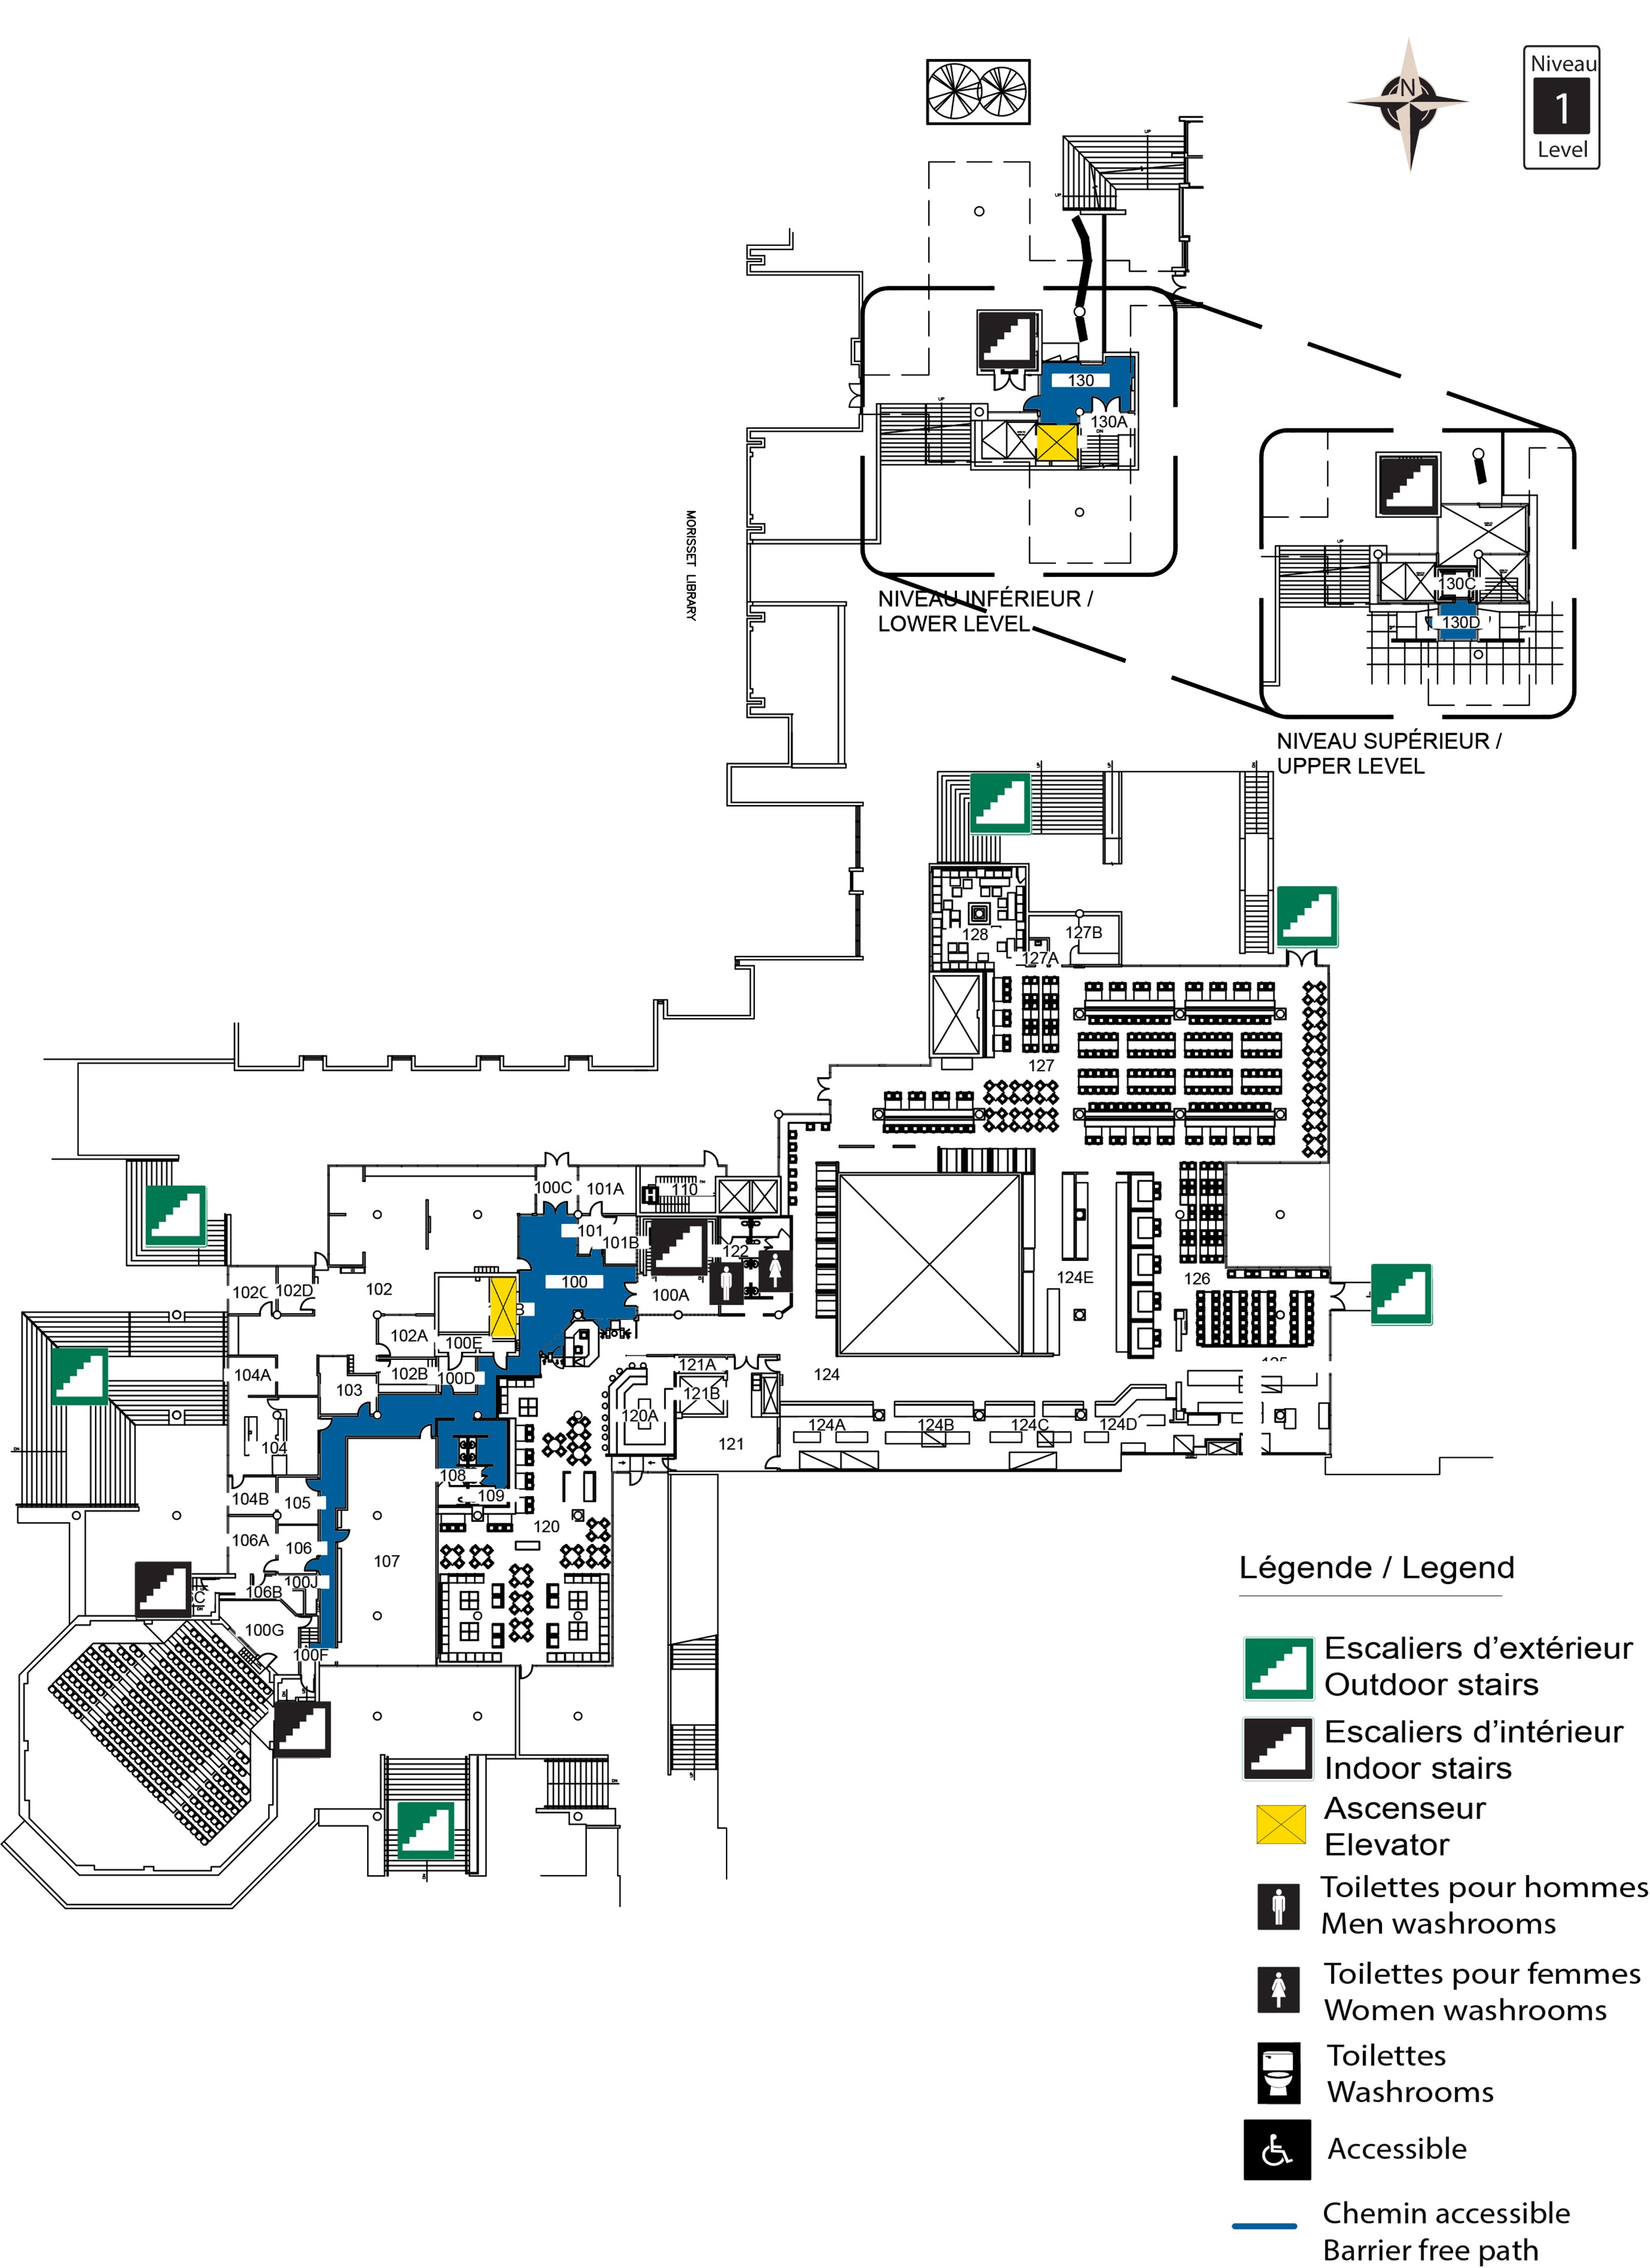 Accessible map of UCU level 1